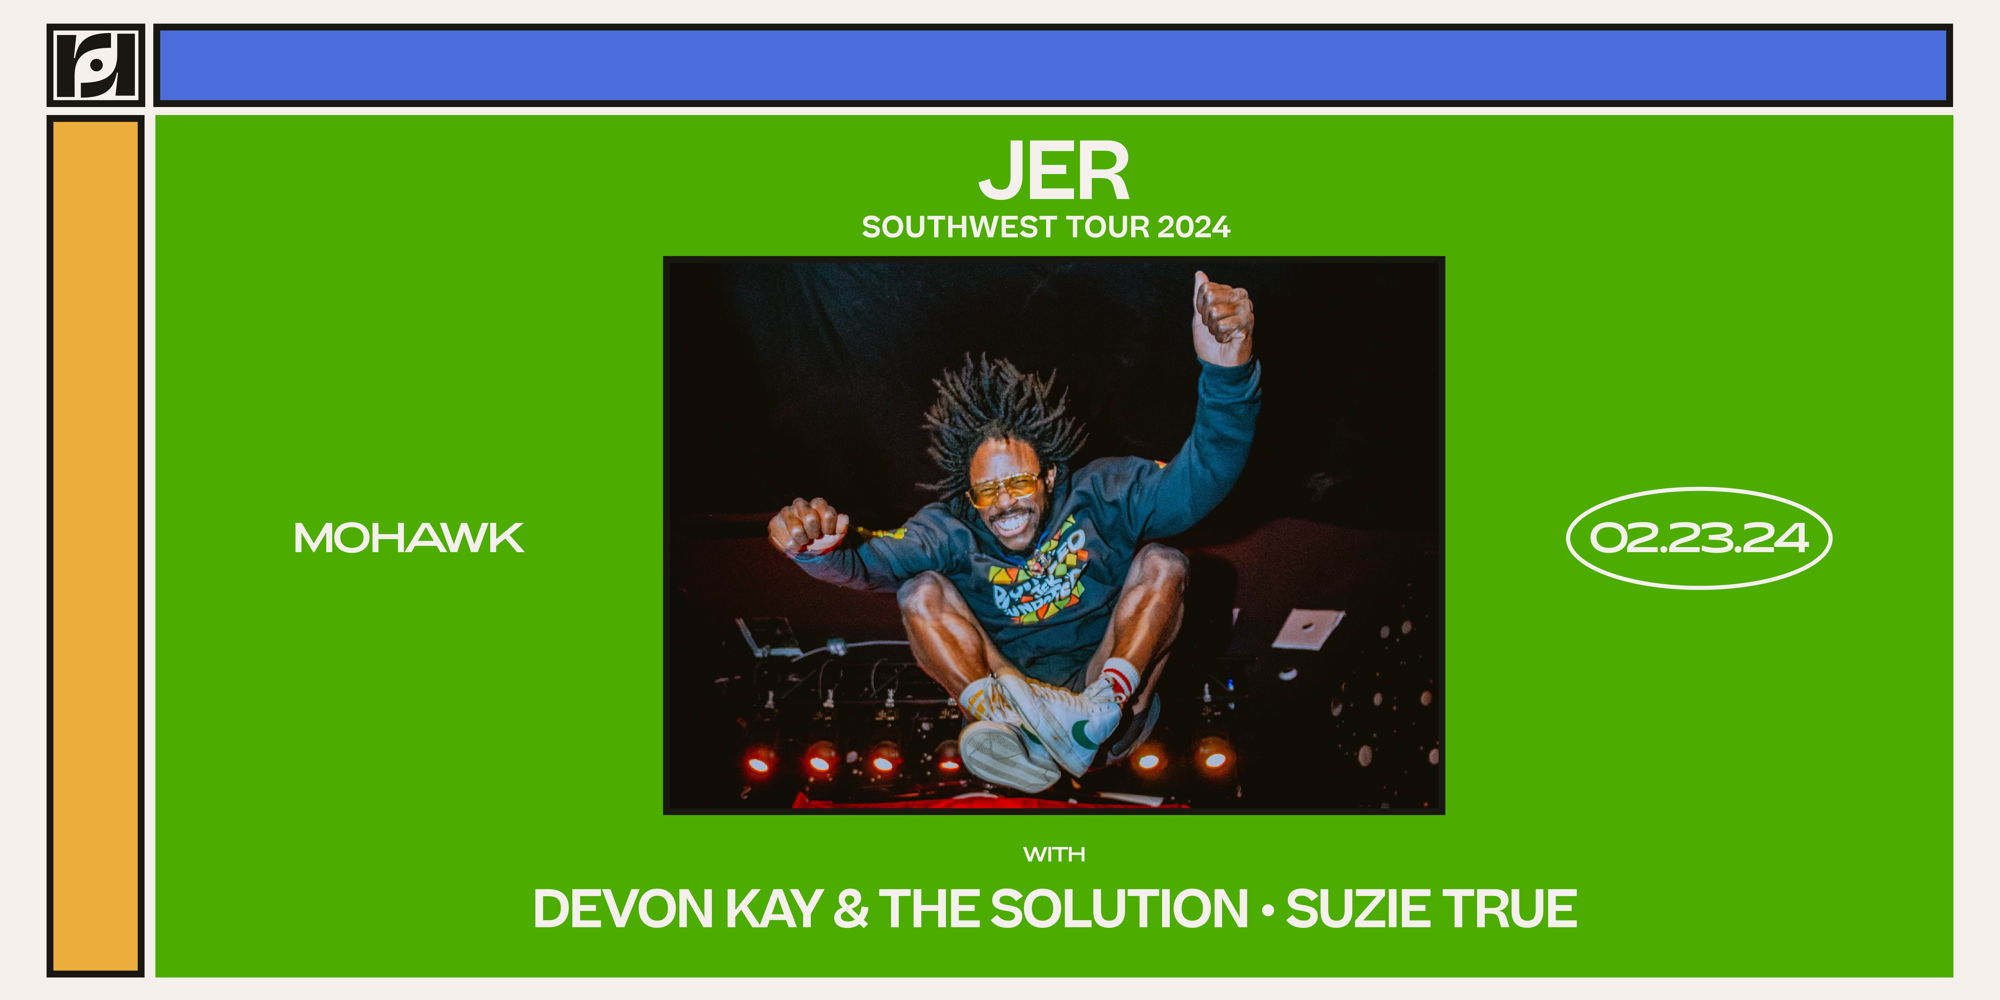 Resound Presents: JER w/ Devon Kay & The Solution and Suzie True at Mohawk promotional image